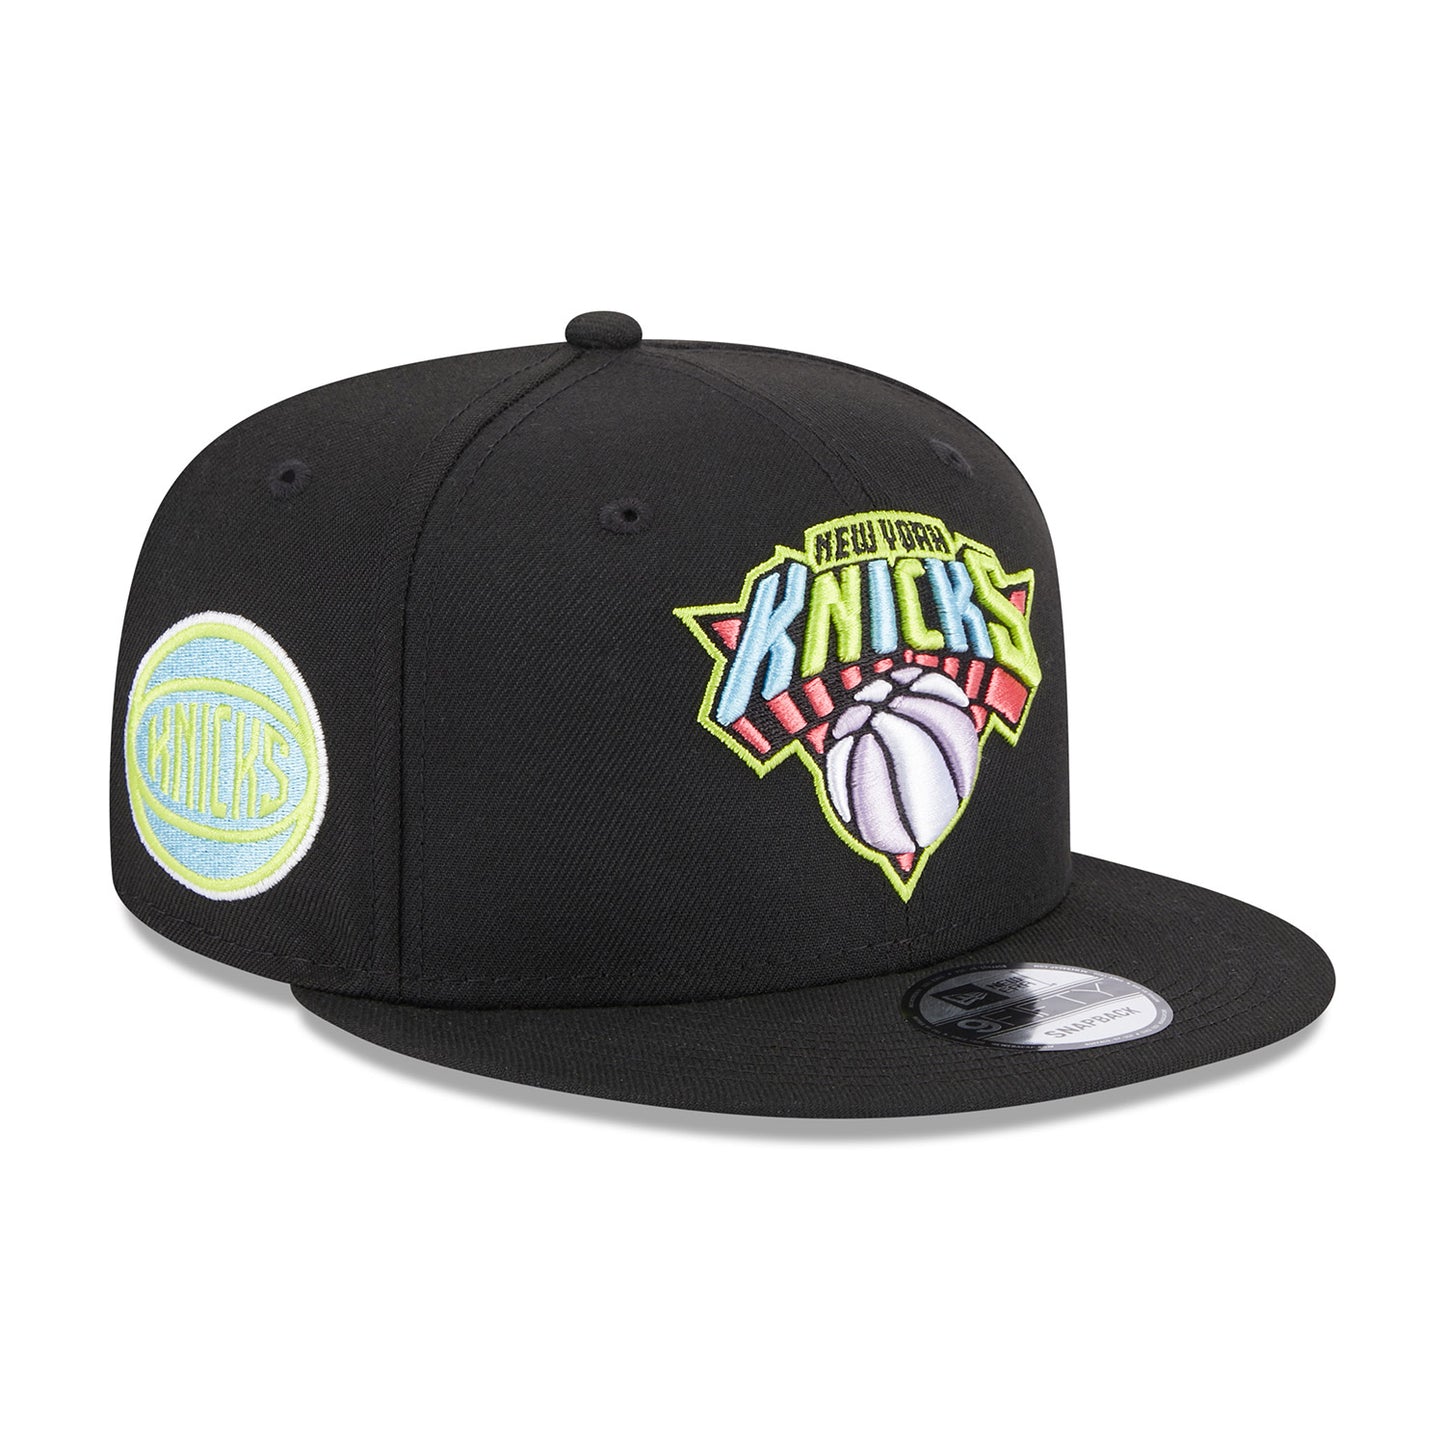 New Era Knicks Colorpack Multi-Color Logo Snapback Hat In Black - Angled Right Side View